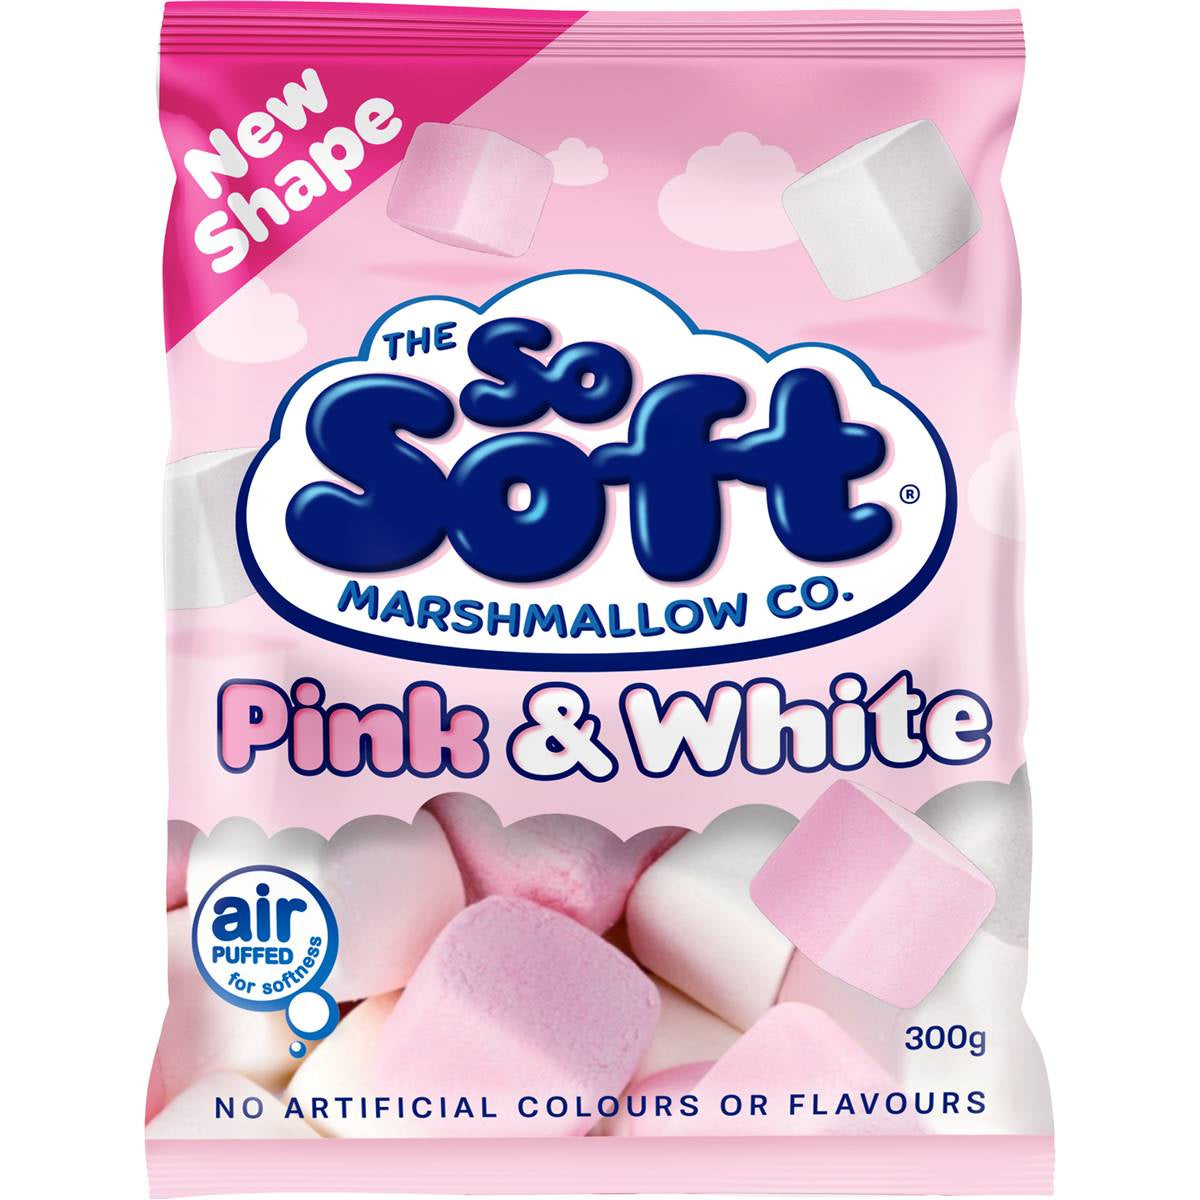 So Soft Marshmallow Co Pink & White 300g